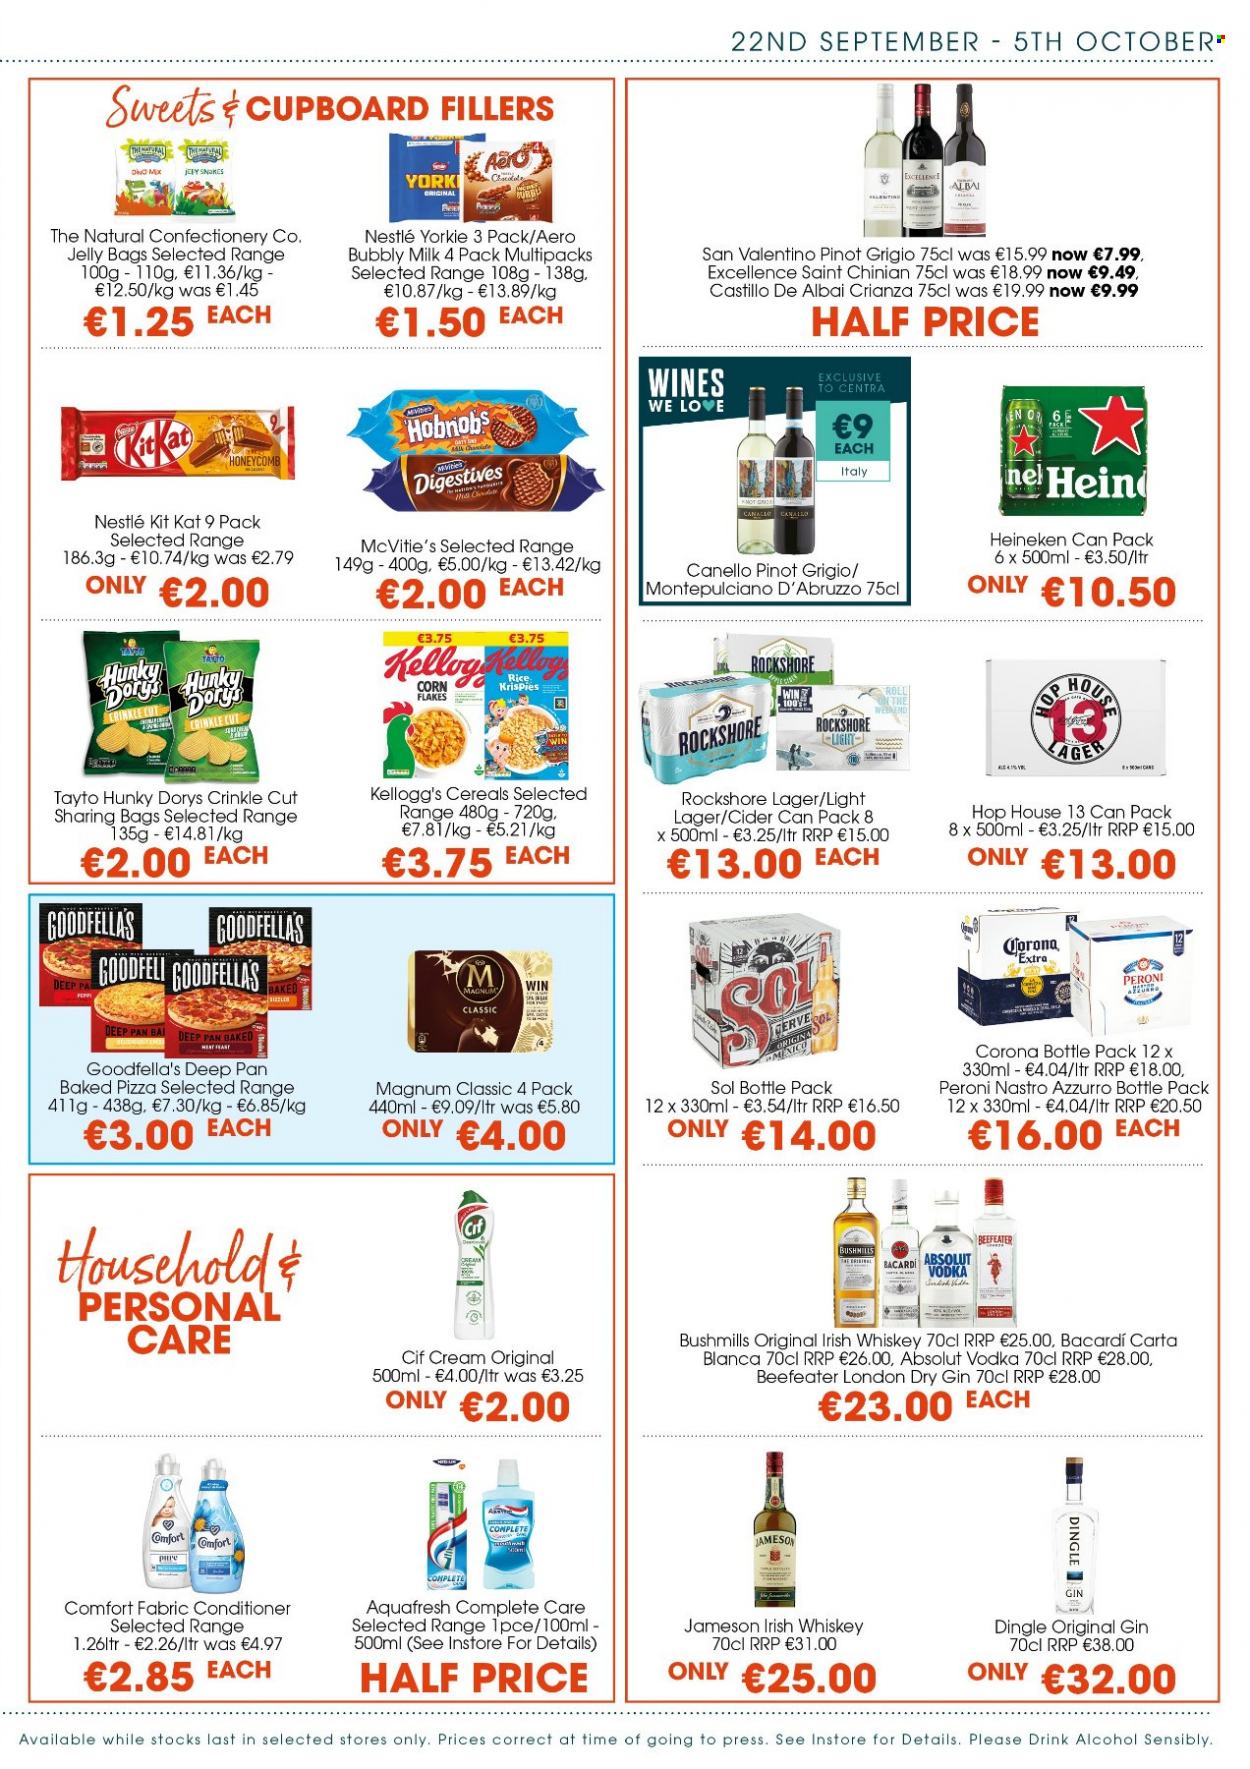 thumbnail - Centra offer  - 22.09.2022 - 05.10.2022 - Sales products - pizza, milk, Magnum, Nestlé, KitKat, jelly, Kellogg's, Tayto, cereals, corn flakes, Rice Krispies, white wine, wine, alcohol, Pinot Grigio, Bacardi, gin, vodka, whiskey, irish whiskey, Jameson, Absolut, Beefeater, whisky, cider, beer, Corona Extra, Heineken, Peroni, Sol, Lager, Rockshore, Cif, Comfort softener, pan. Page 3.